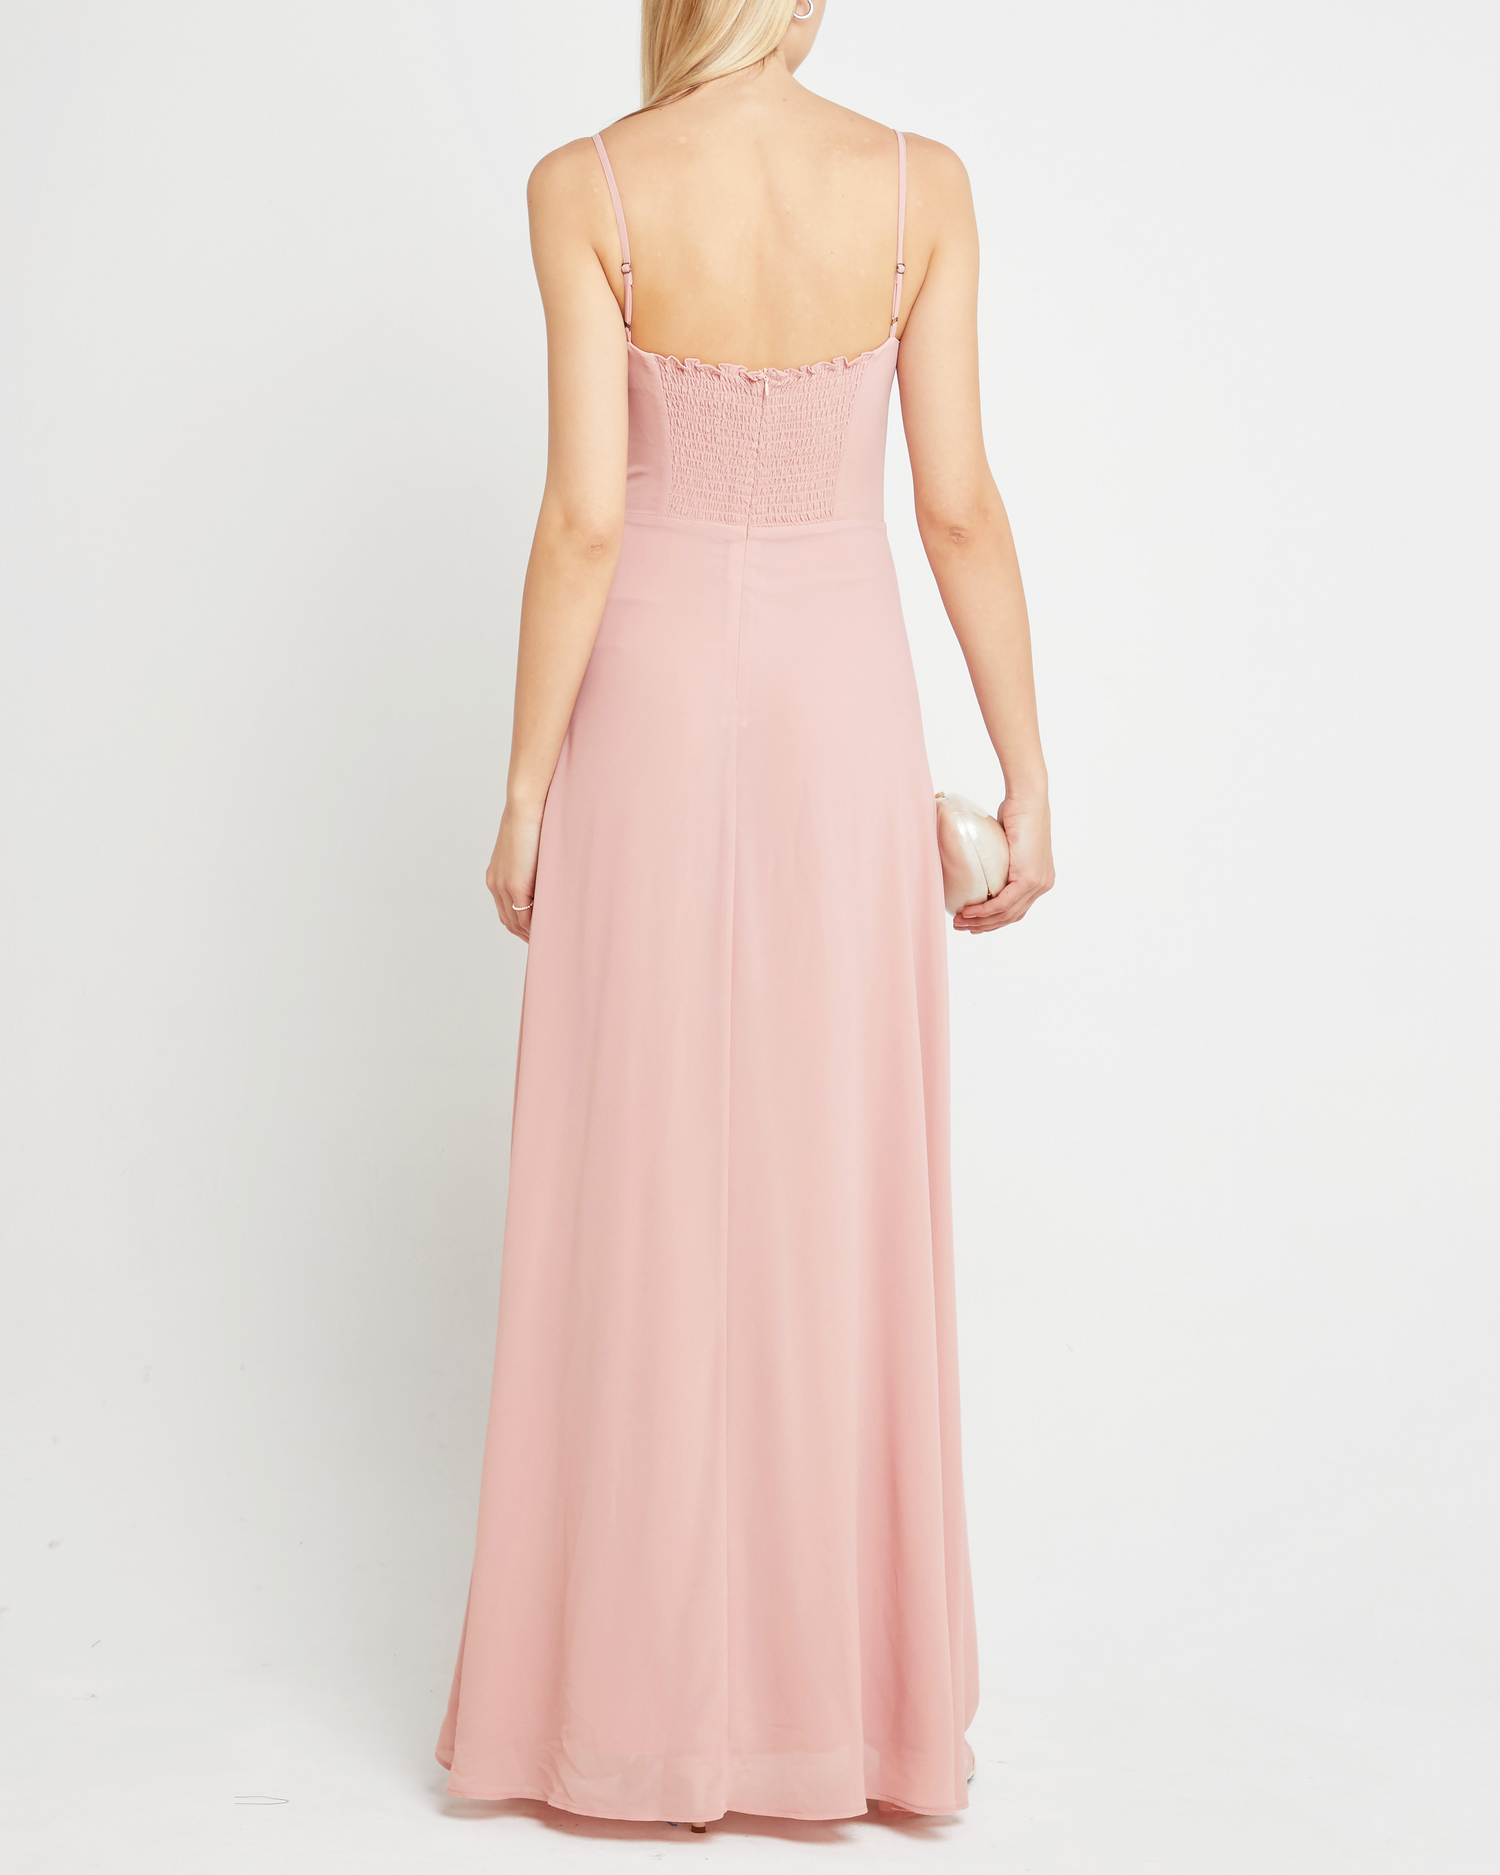 Sixth image of Jessica Maxi Dress, a pink wedding guest dress with back zipper, straight neckline, side slit, adjustable straps, smocked back detail, and lining